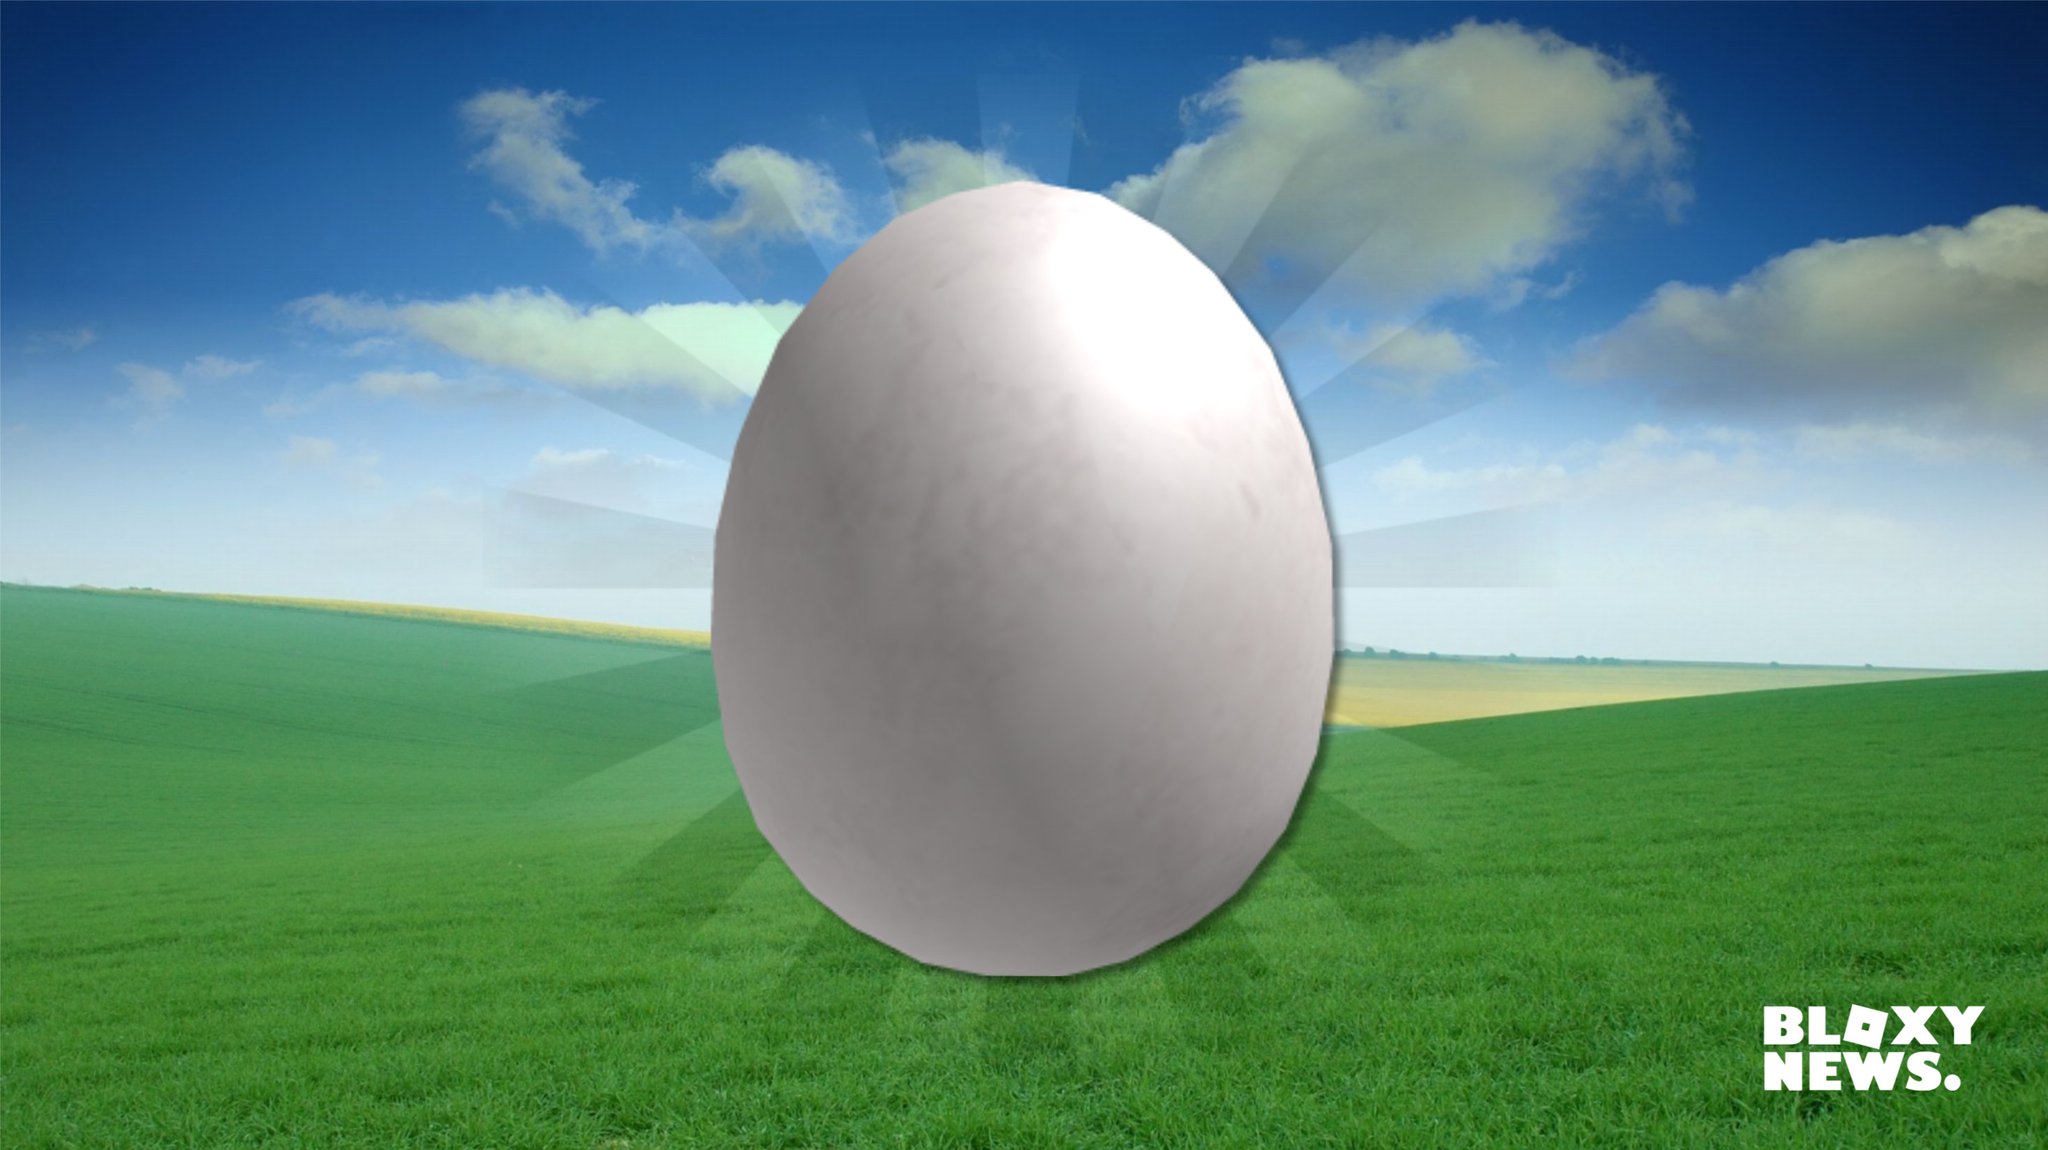 Bloxy News On Twitter Roblox Egg Hunt 2020 News There Have Been 54 Eggs Leaked All Of Which Are Just Placeholders Image Below Meaning The Meshes Nor Textures Have Been - bloxy news on twitter bloxynews the next batch of eggs for the roblox 2019 egg hunt scrambled in time have been leaked https t co tvyakc3dim https t co cejezuondl